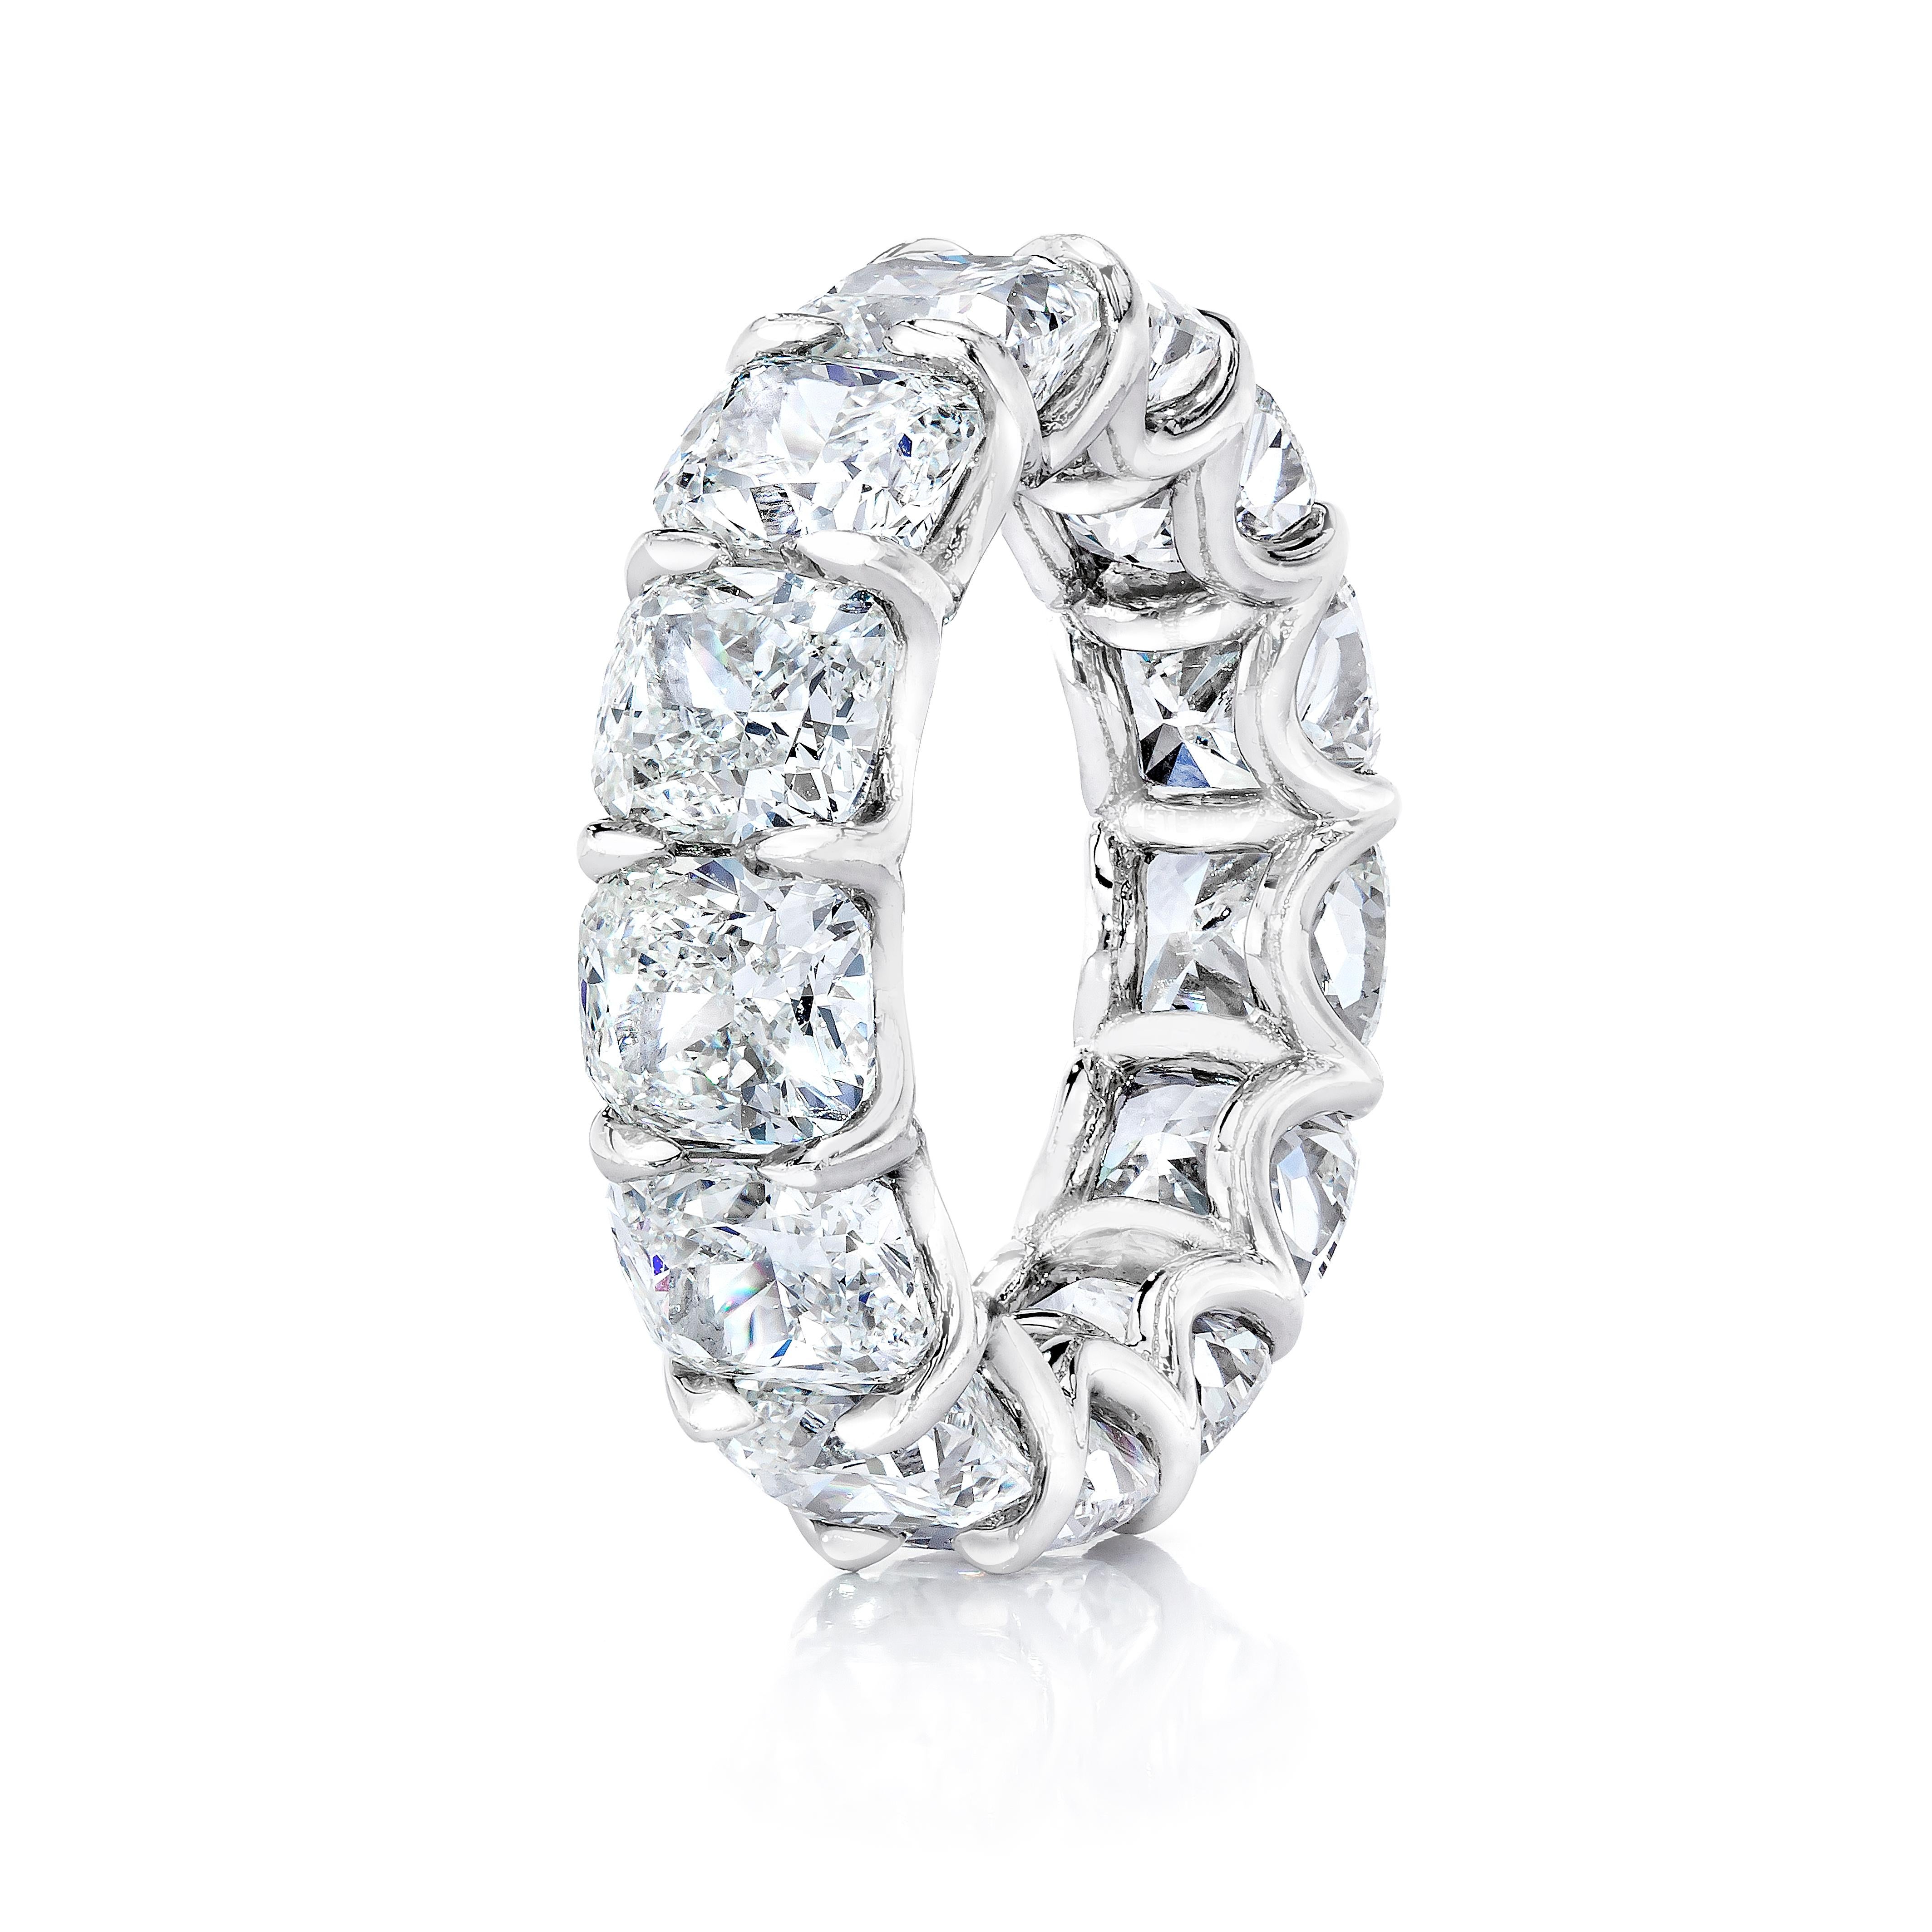 13 Cushion Cut Diamonds weighing 13.10 Carats. Stone are of D-F Color and VS-VVS Clarity.
Set in Platinum.

Ring can be sized slightly or a new setting can be made to accommodate any finger size.
Also available and/or can be made to order in